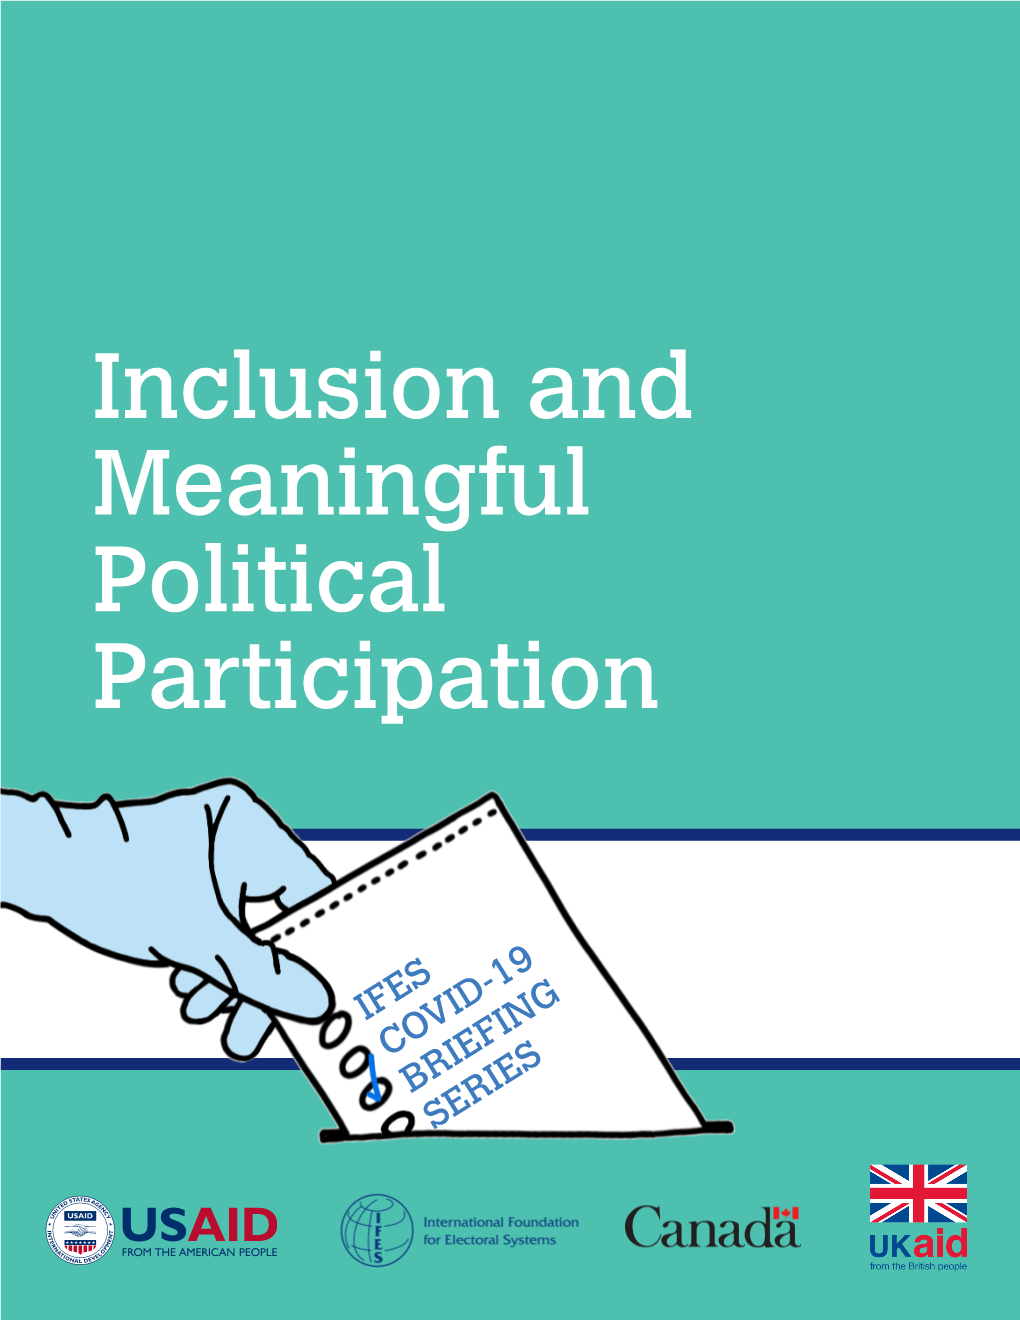 Inclusion and Meaningful Political Participation (IFES)